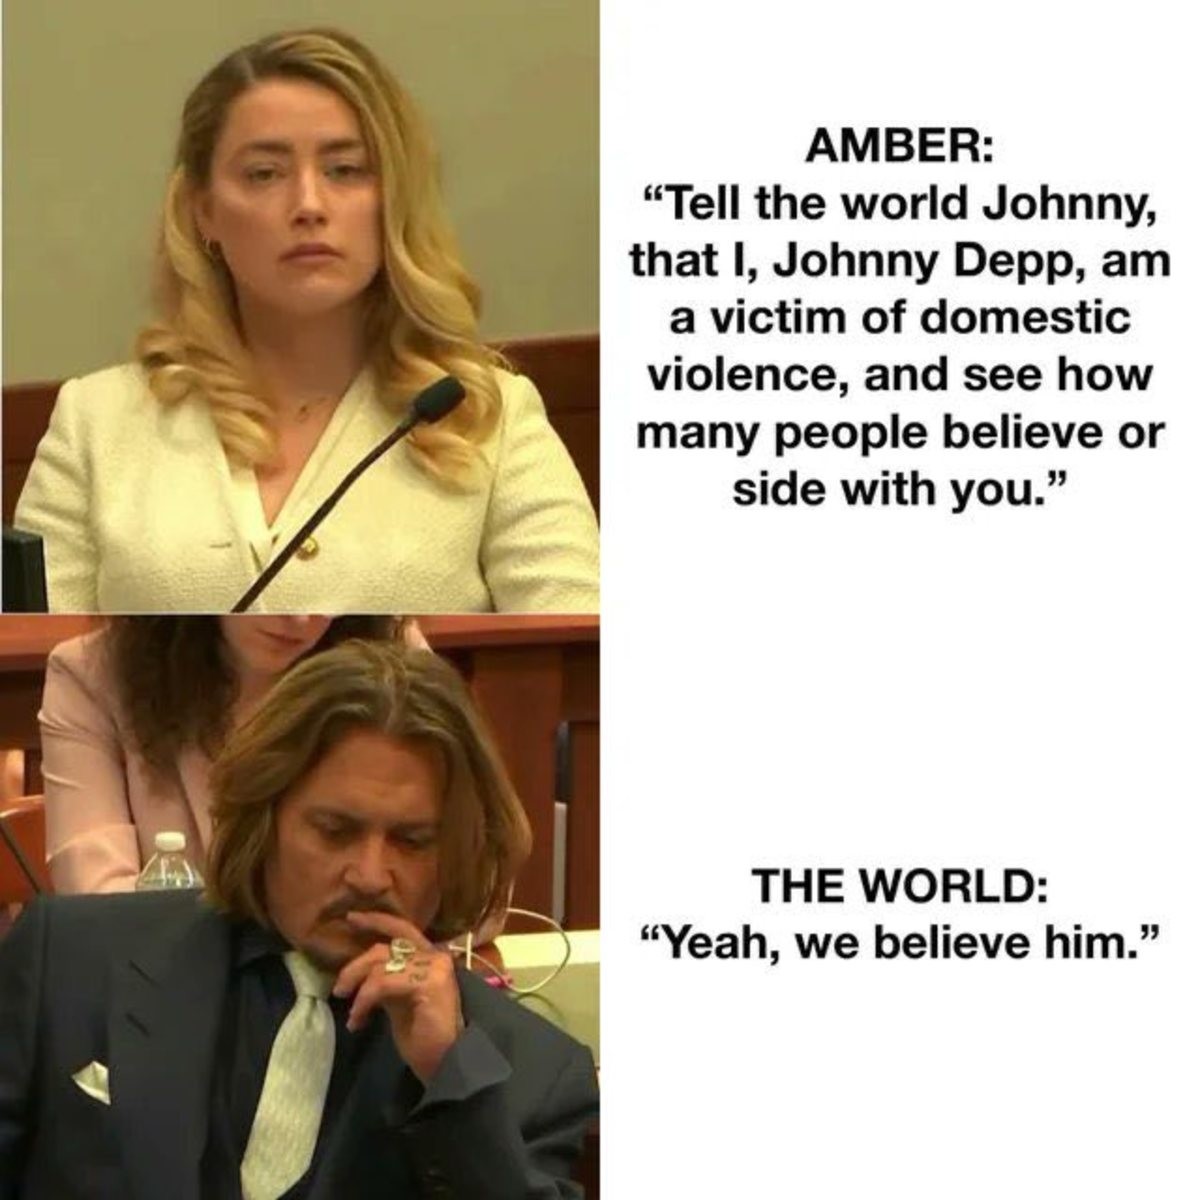 Depp Wins. .. This was his defamation case. It has nothing to do with her abusing him. Unfortunately she isn't going to prison which is where she belongs